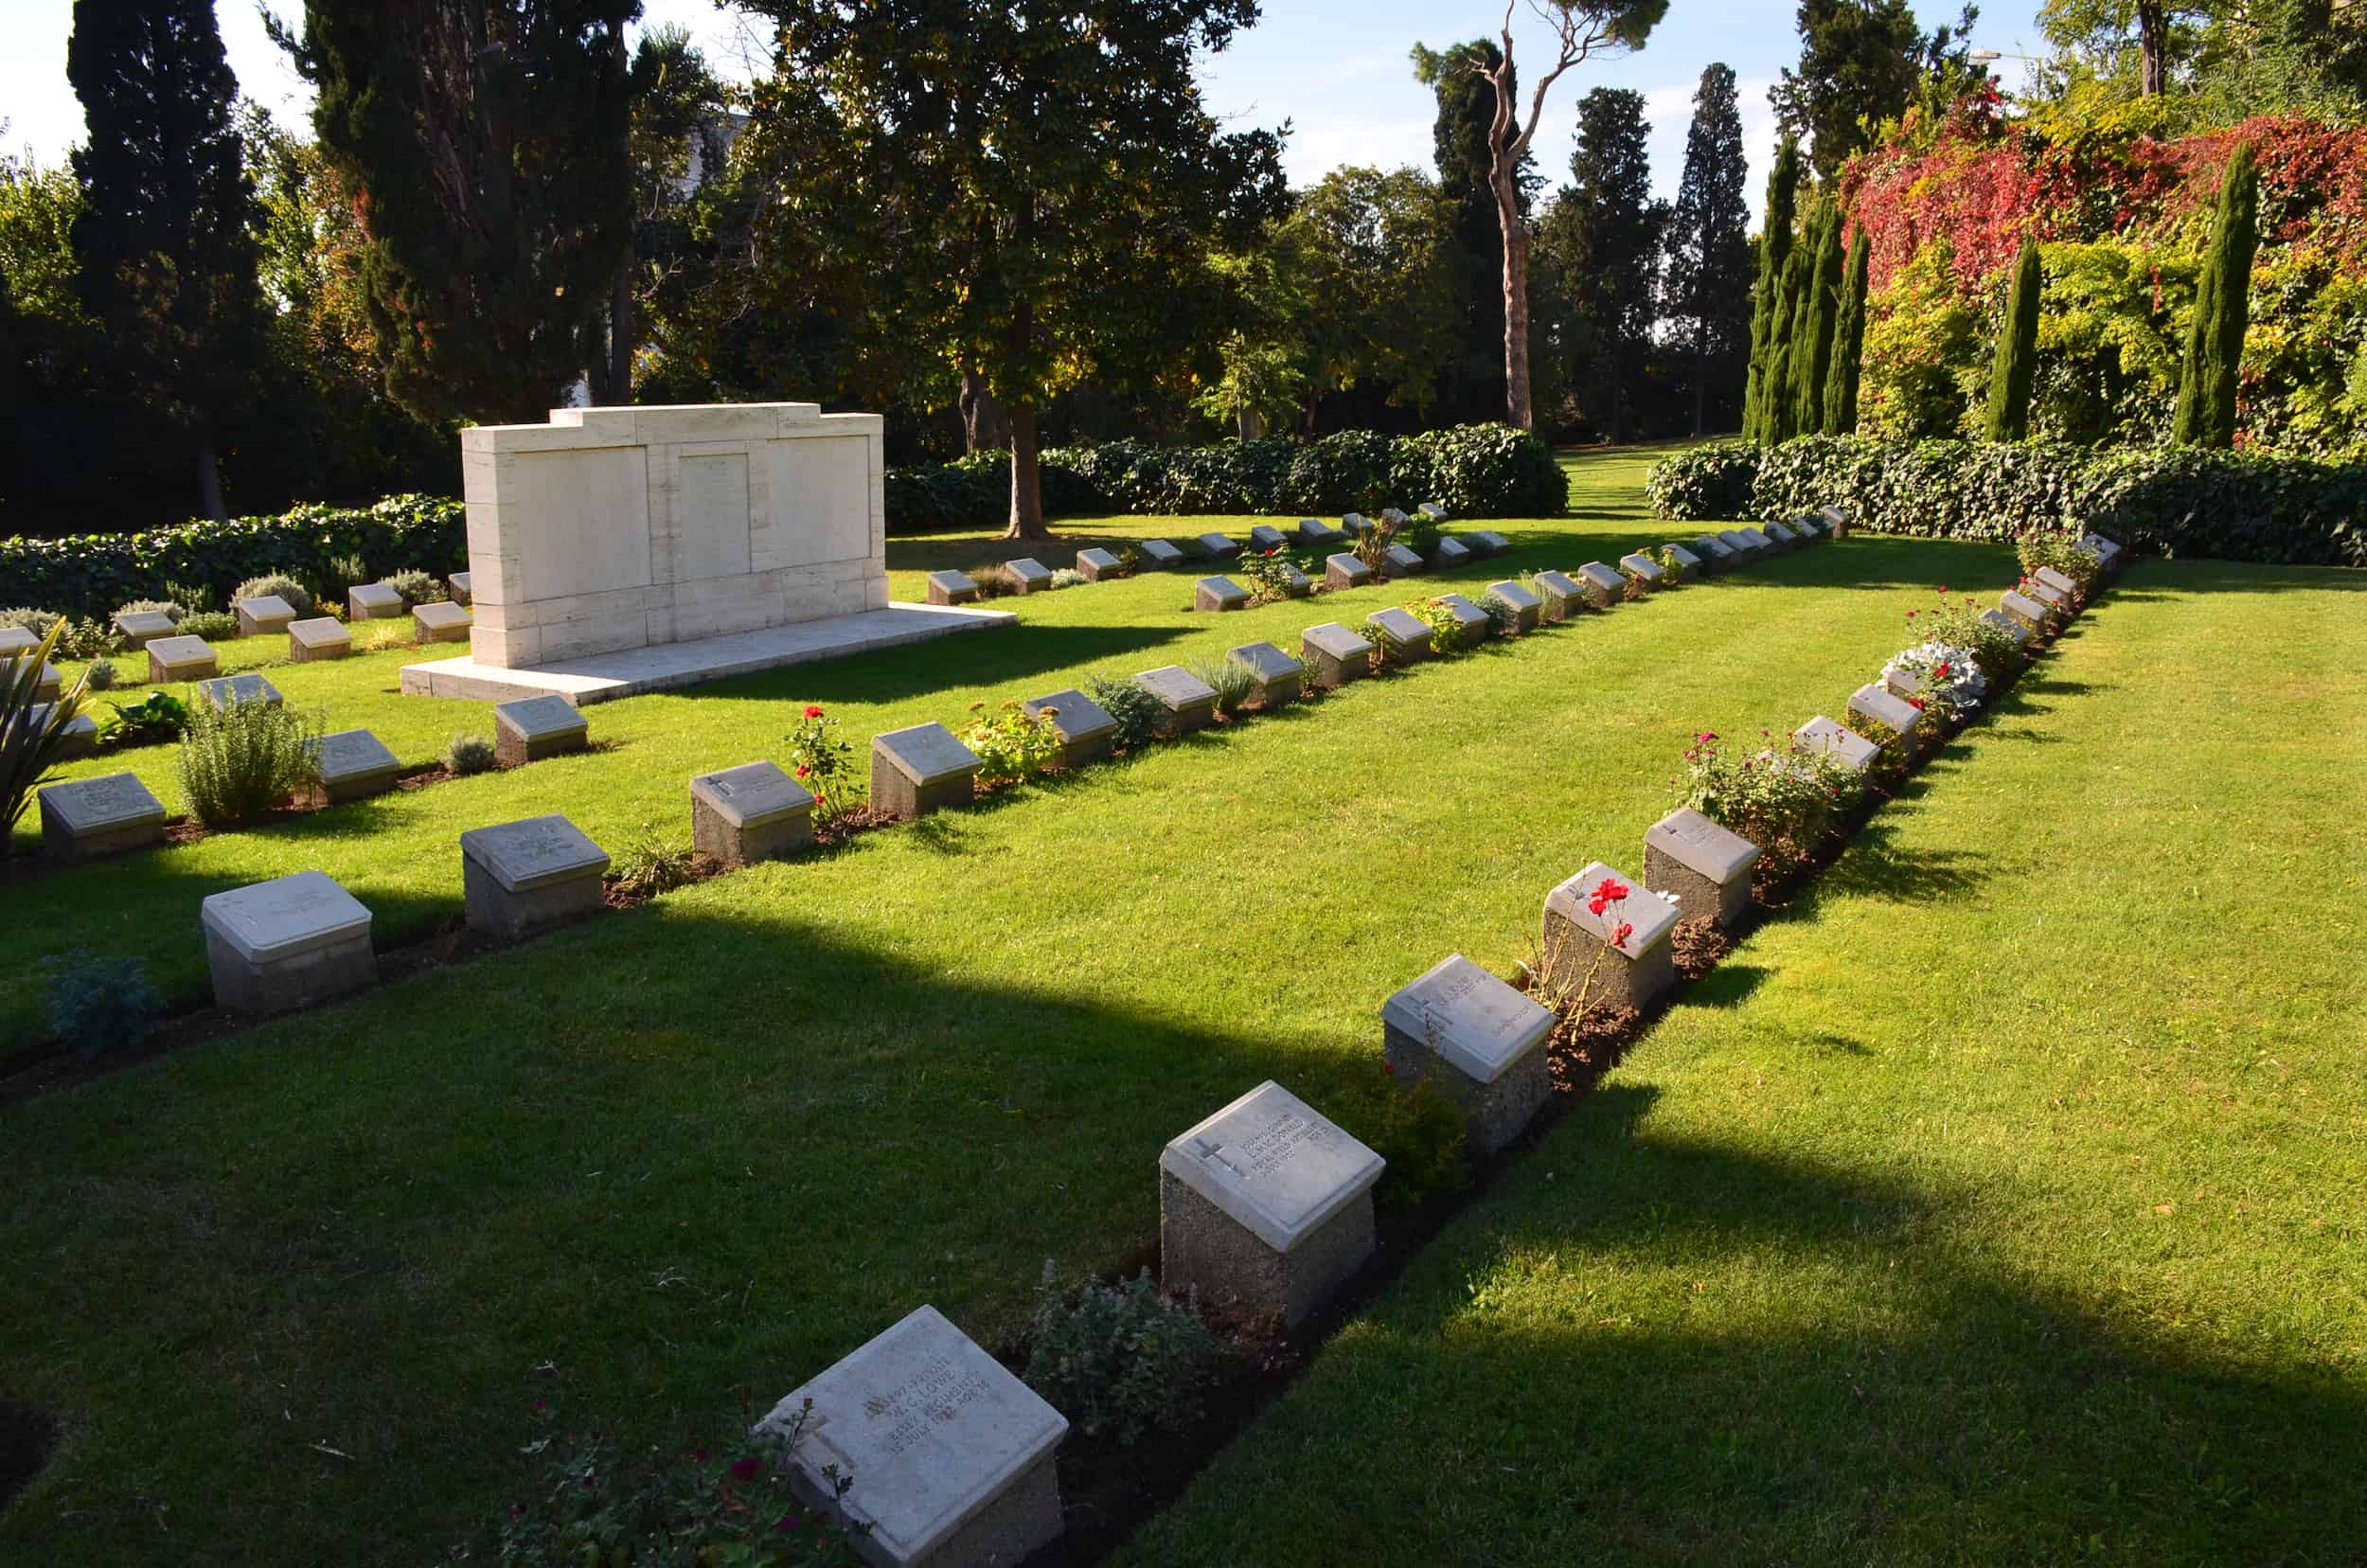 World War I section at the Haidar Pasha Cemetery in Istanbul, Turkey